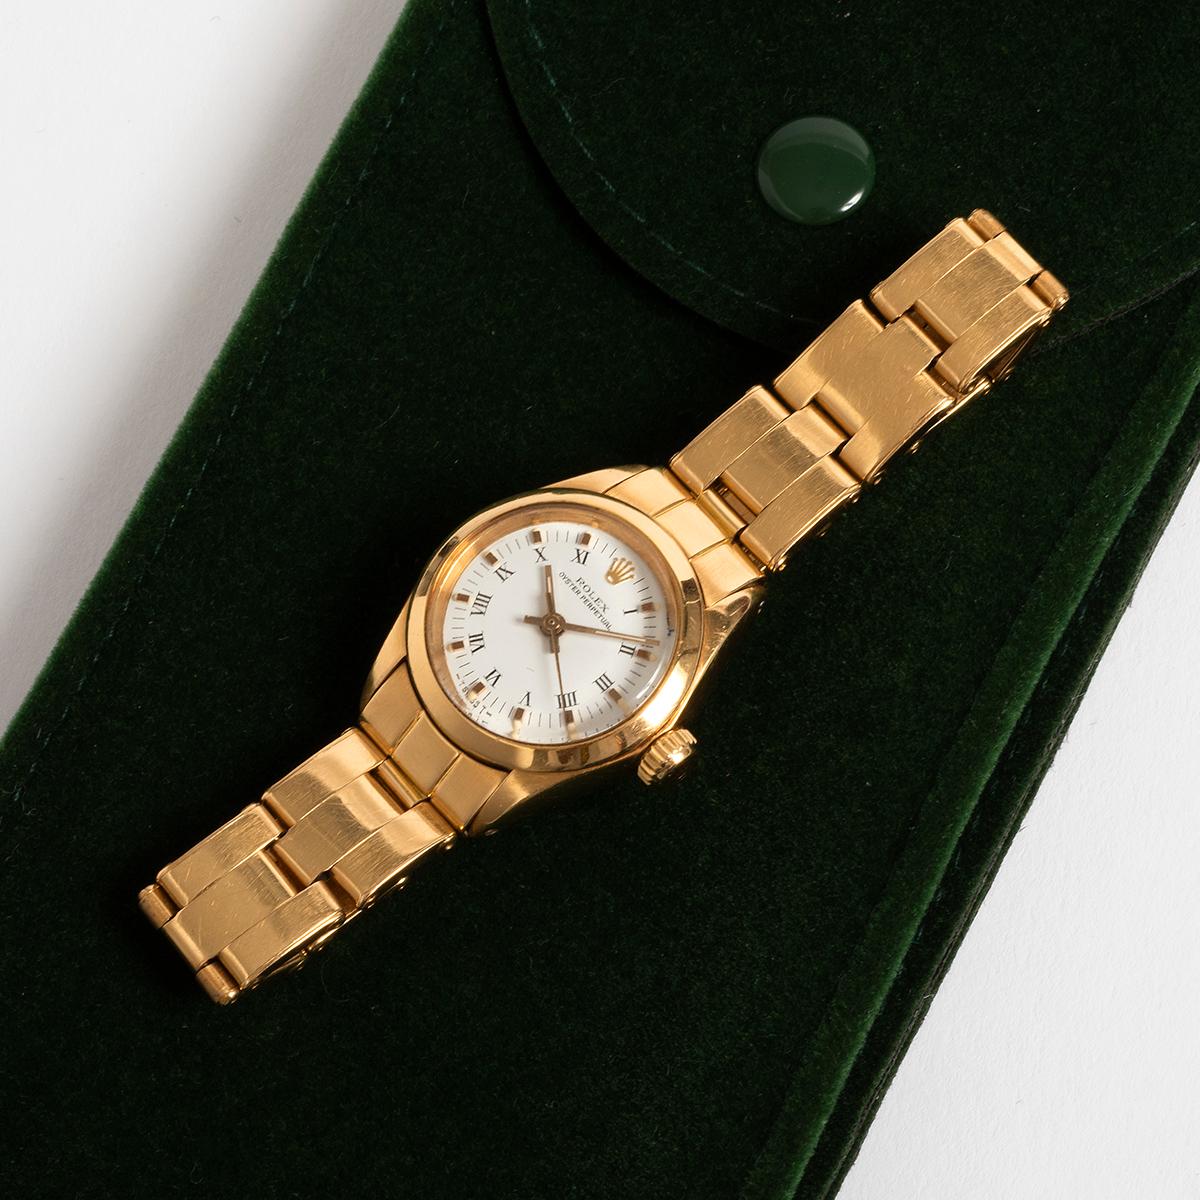 Women's or Men's Rolex Lady Oyster Perpetual Ref 6718, 18k Yellow Gold, Excellent Condition, Rare